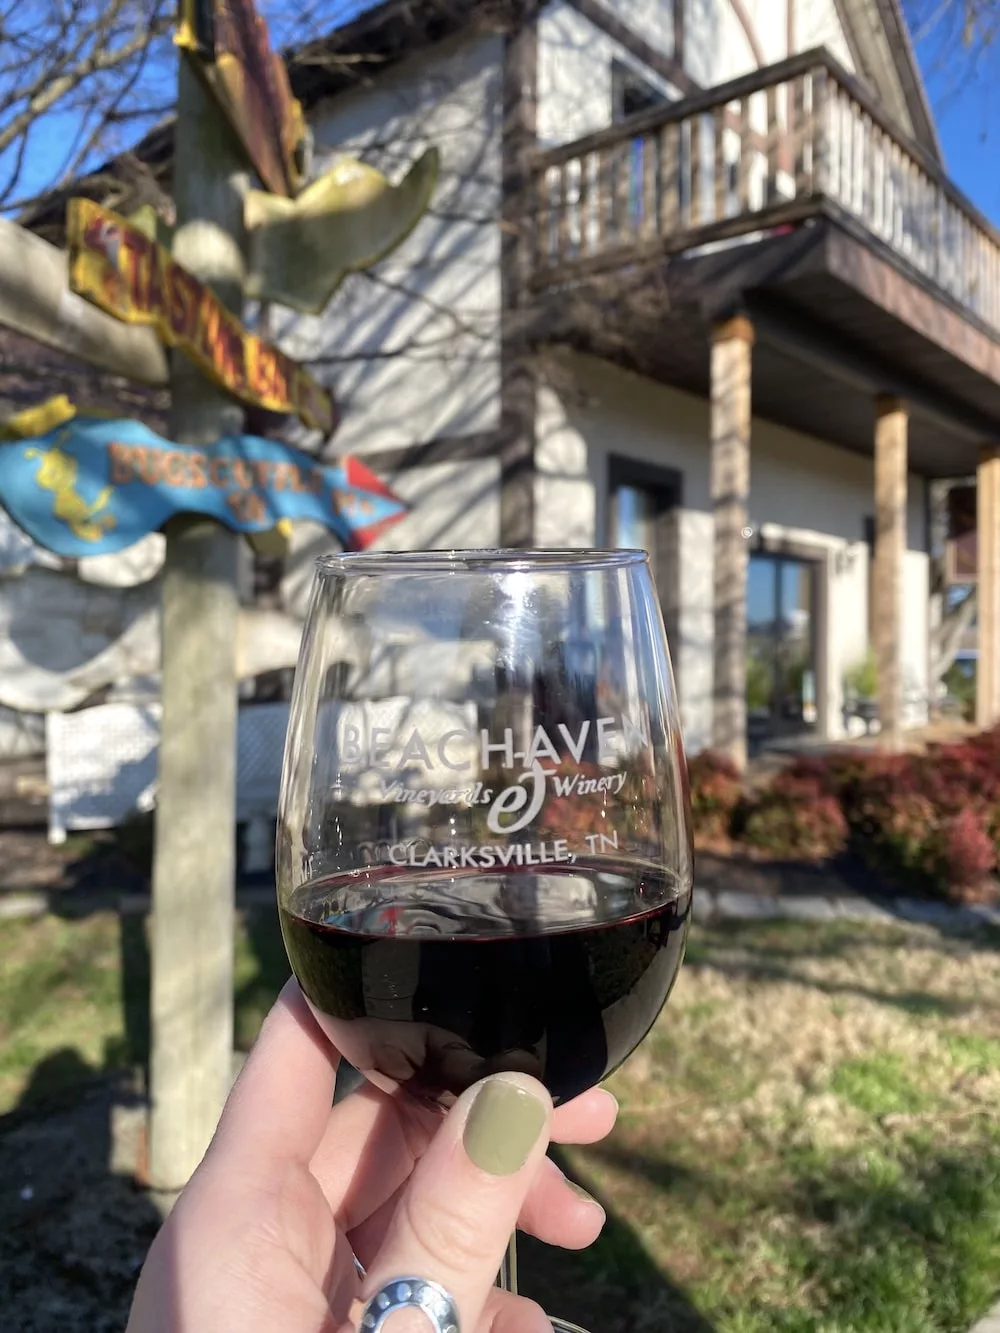 Hand holding glass of wine at Beachaven Winery in Clarksville, Tennessee